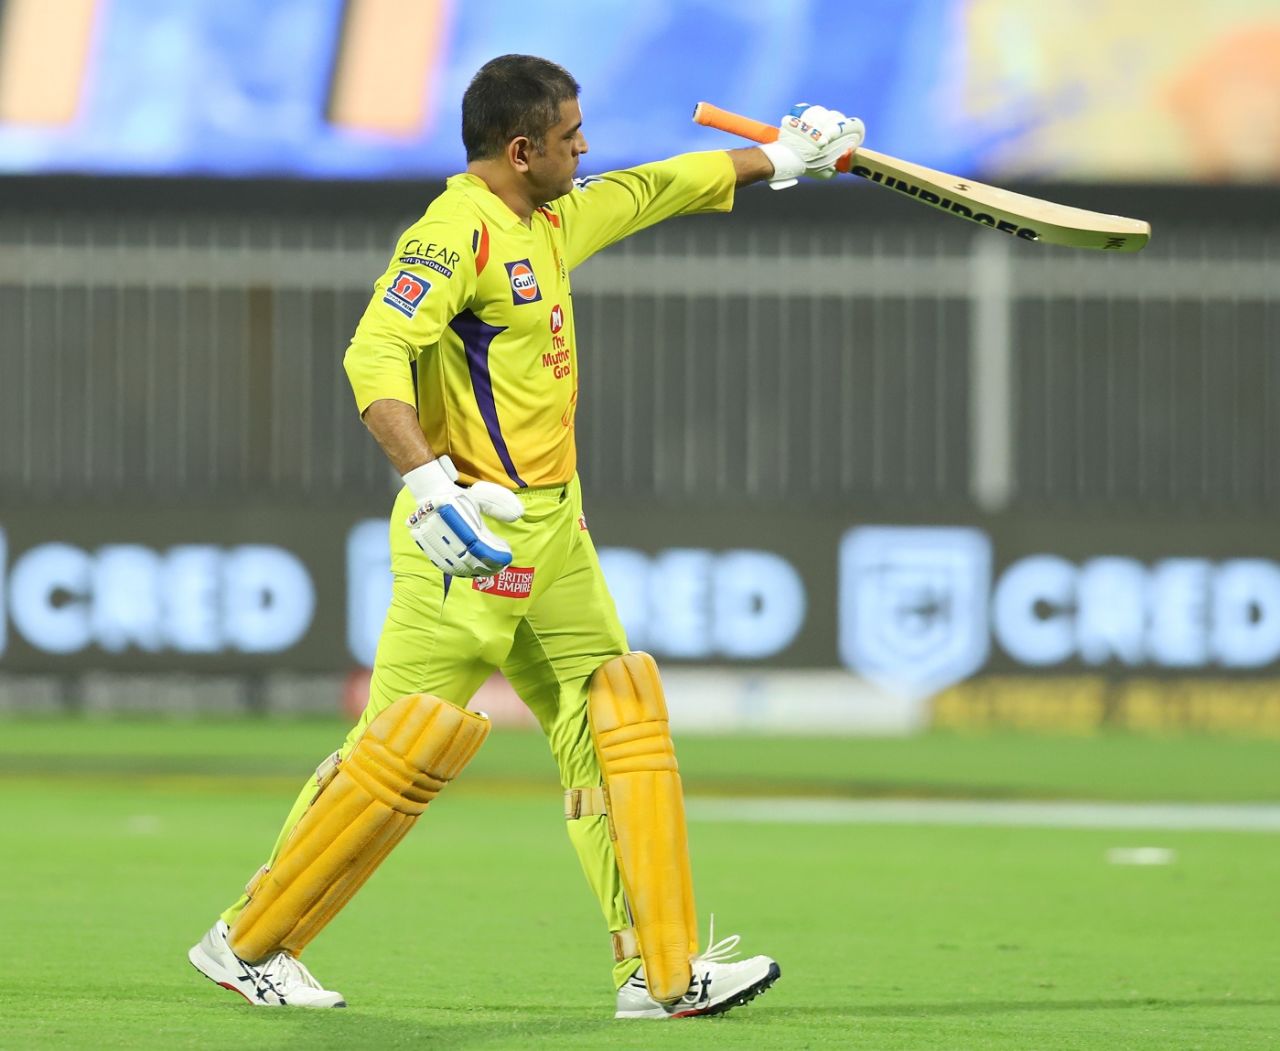 MS Dhoni walks back after falling for another low score, Chennai Super Kings vs Mumbai Indians, IPL 2020, Sharjah, October 23, 2020